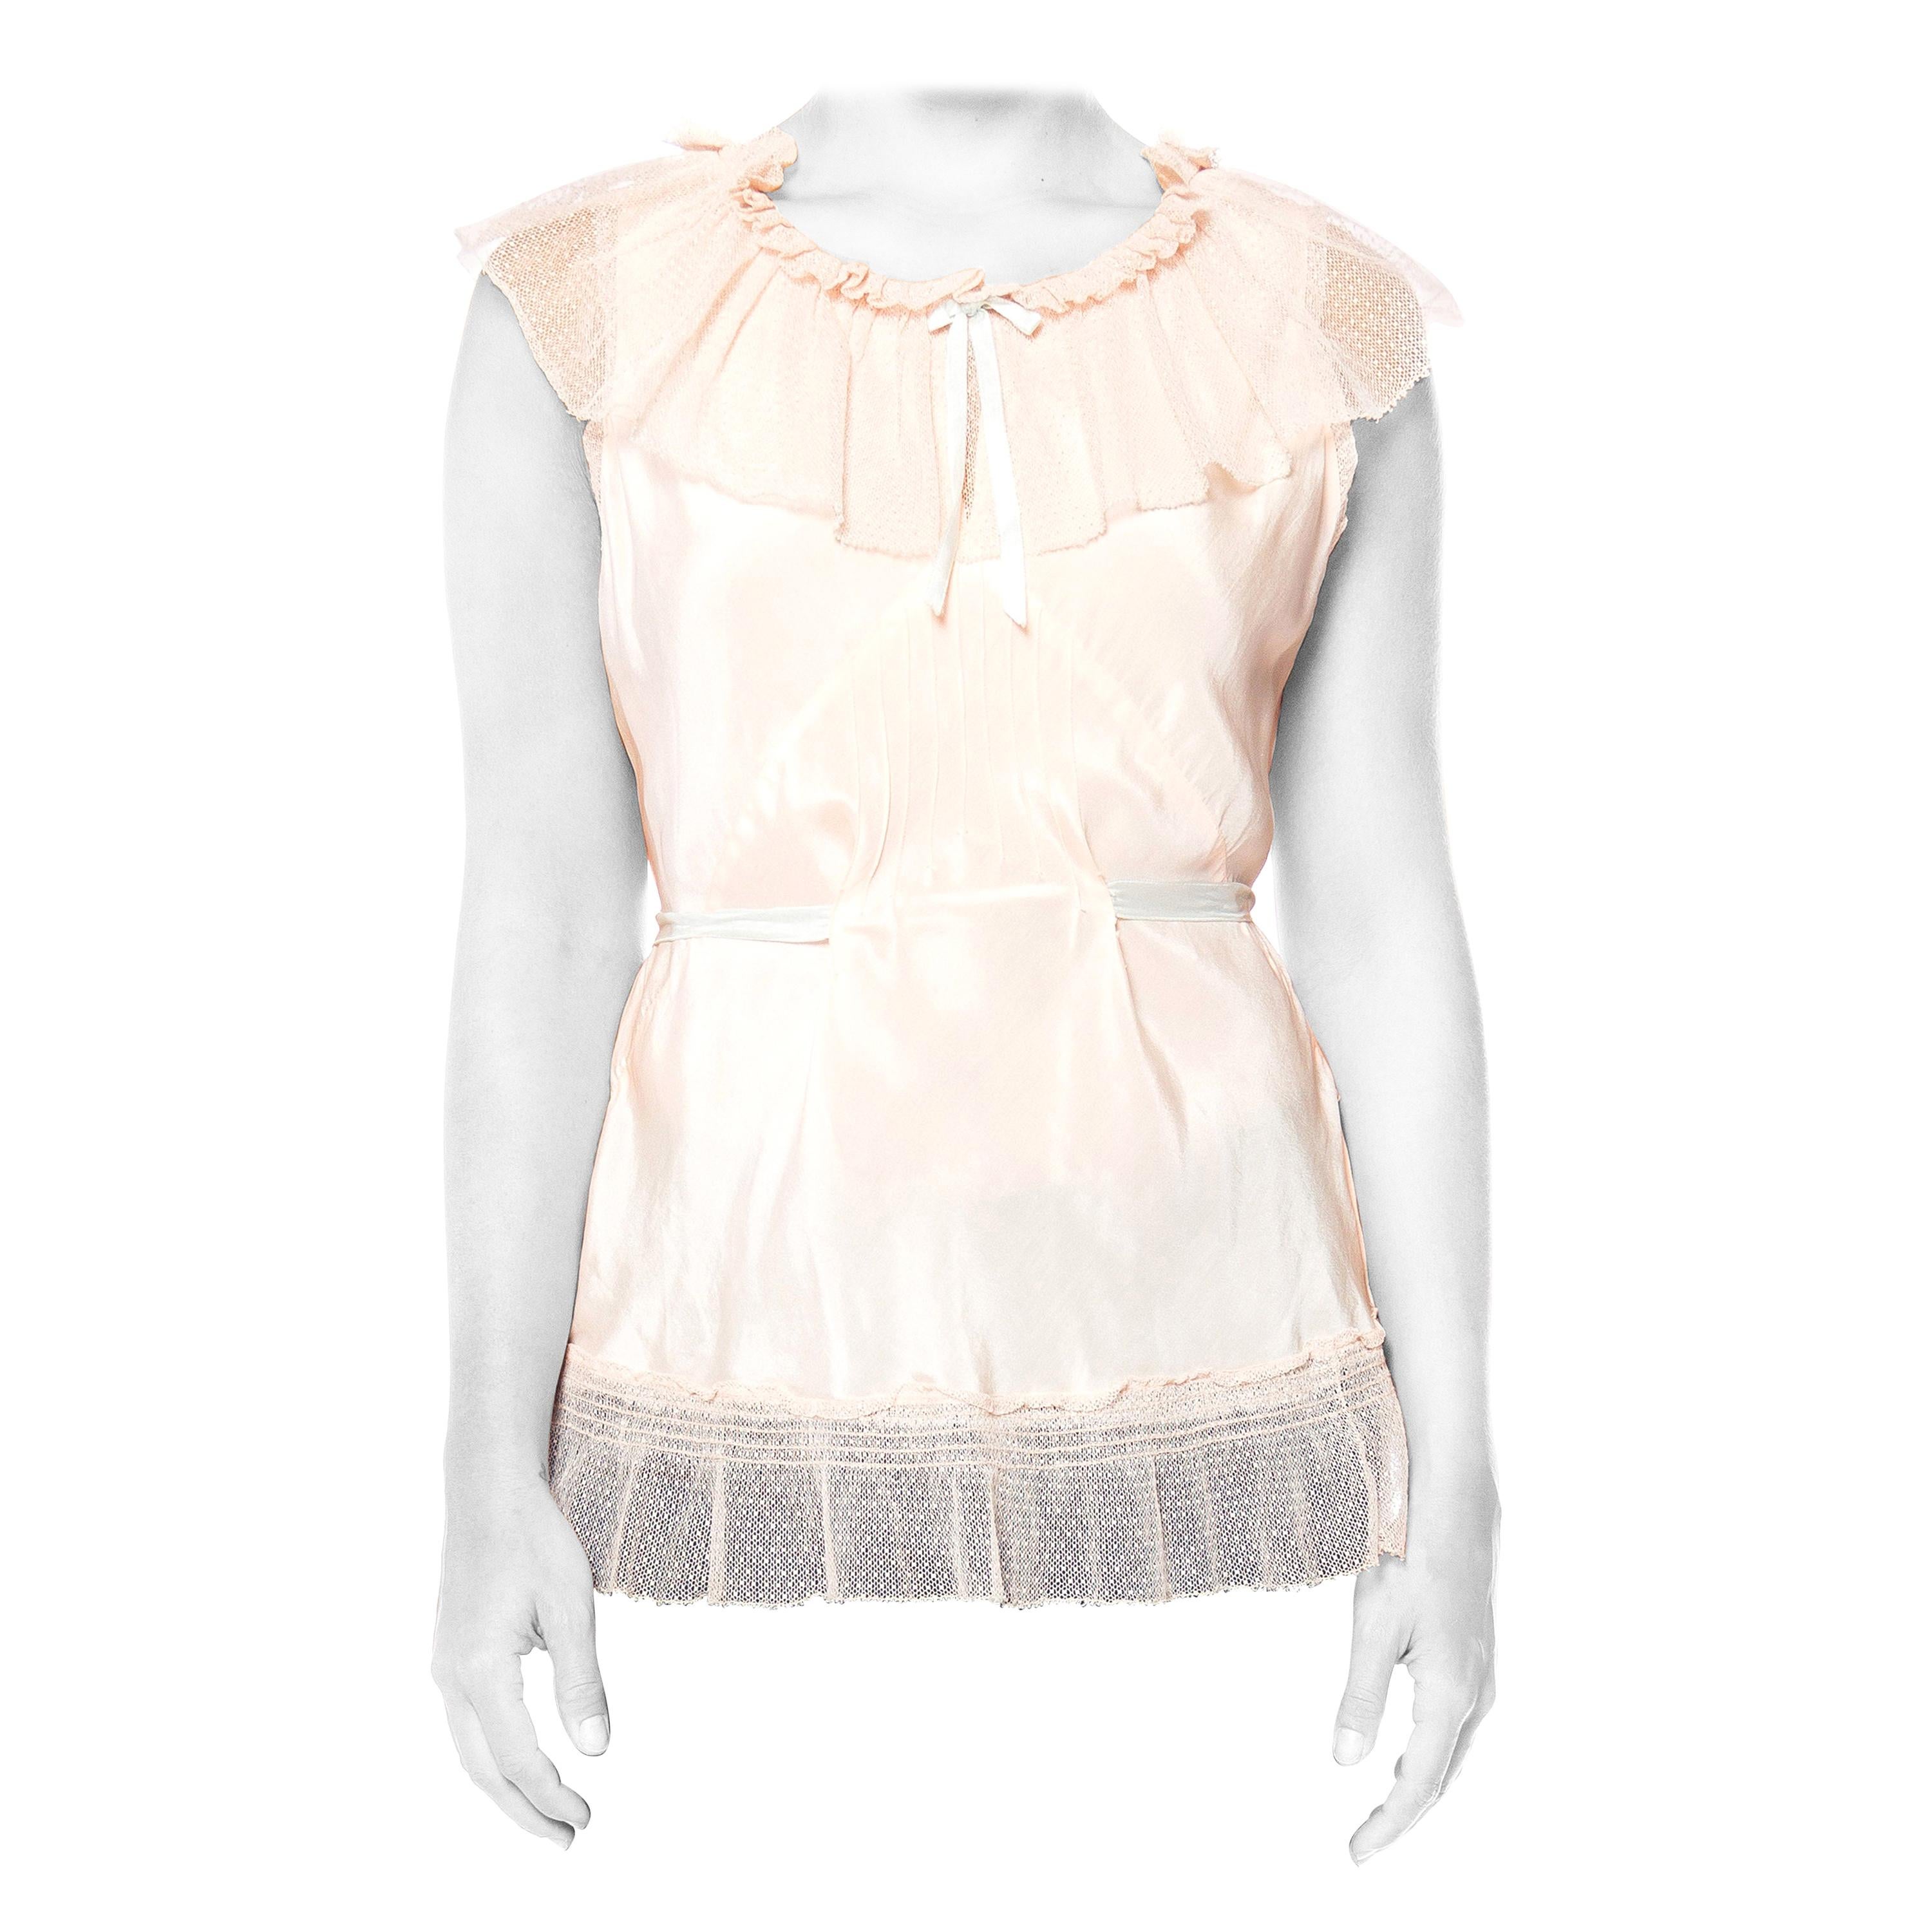 1930S Baby Pink Bias Cut Silk Lingerie Top  With Net Ruffles & Satin Bows